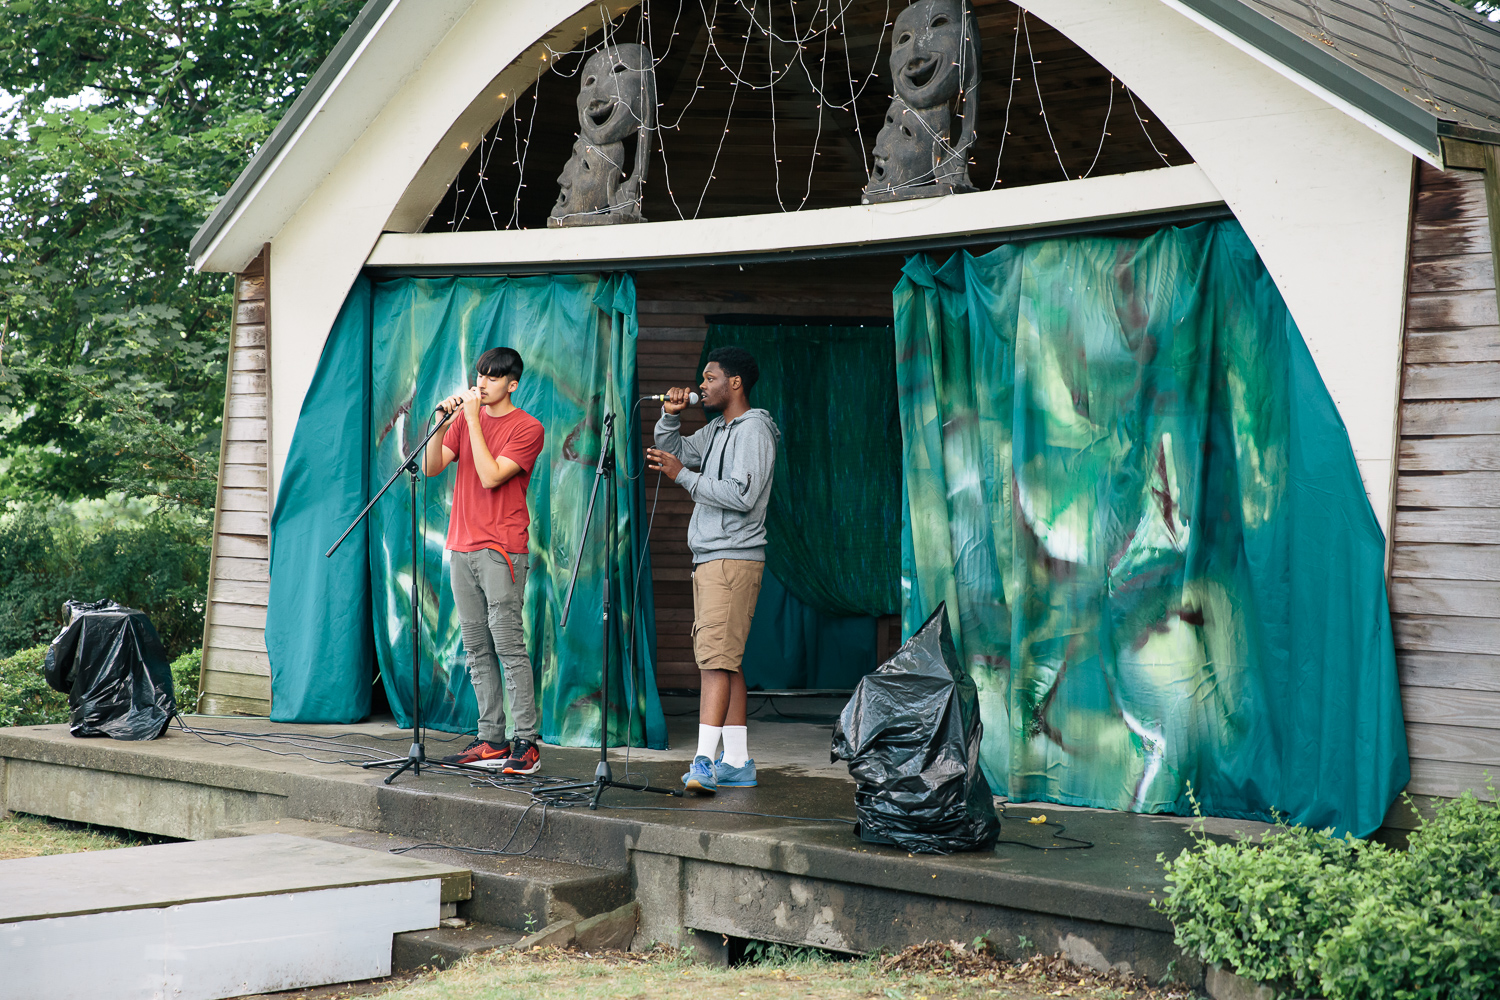 Two musicians stand on a wood stage playing instruments in front of green backdrop.